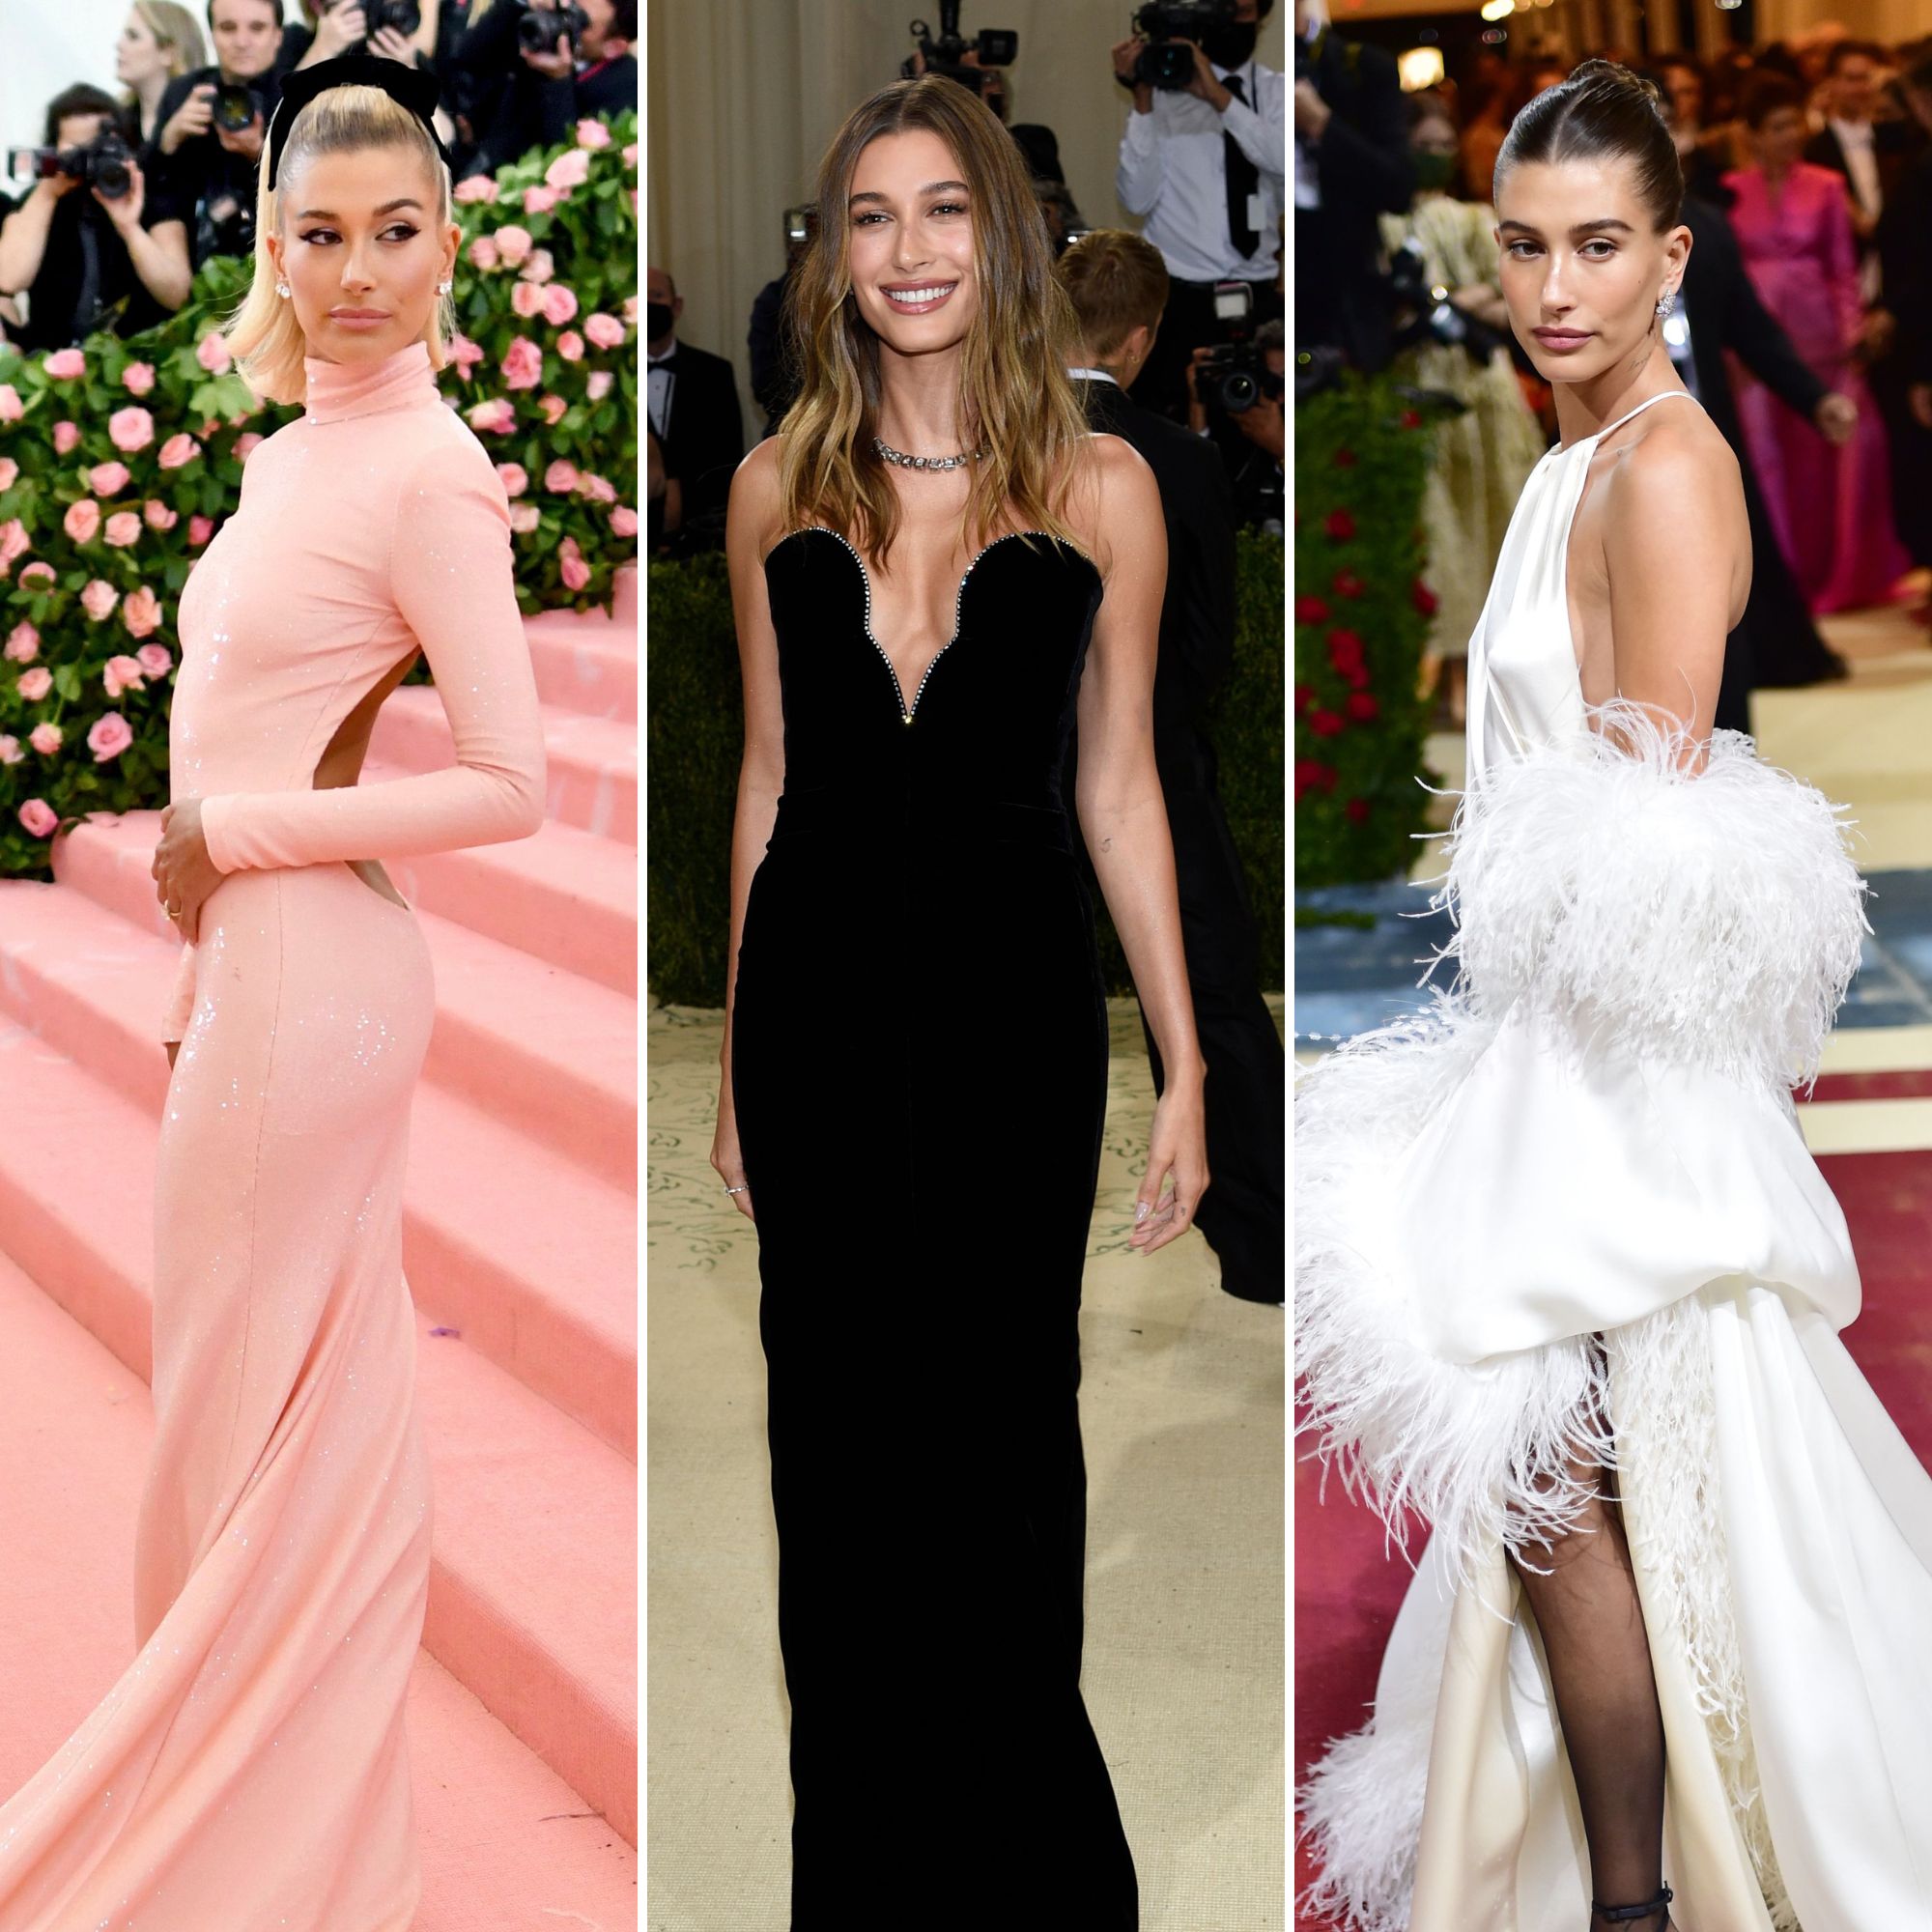 Hailey Baldwin's Best Red Carpet Moments and Style Evolution